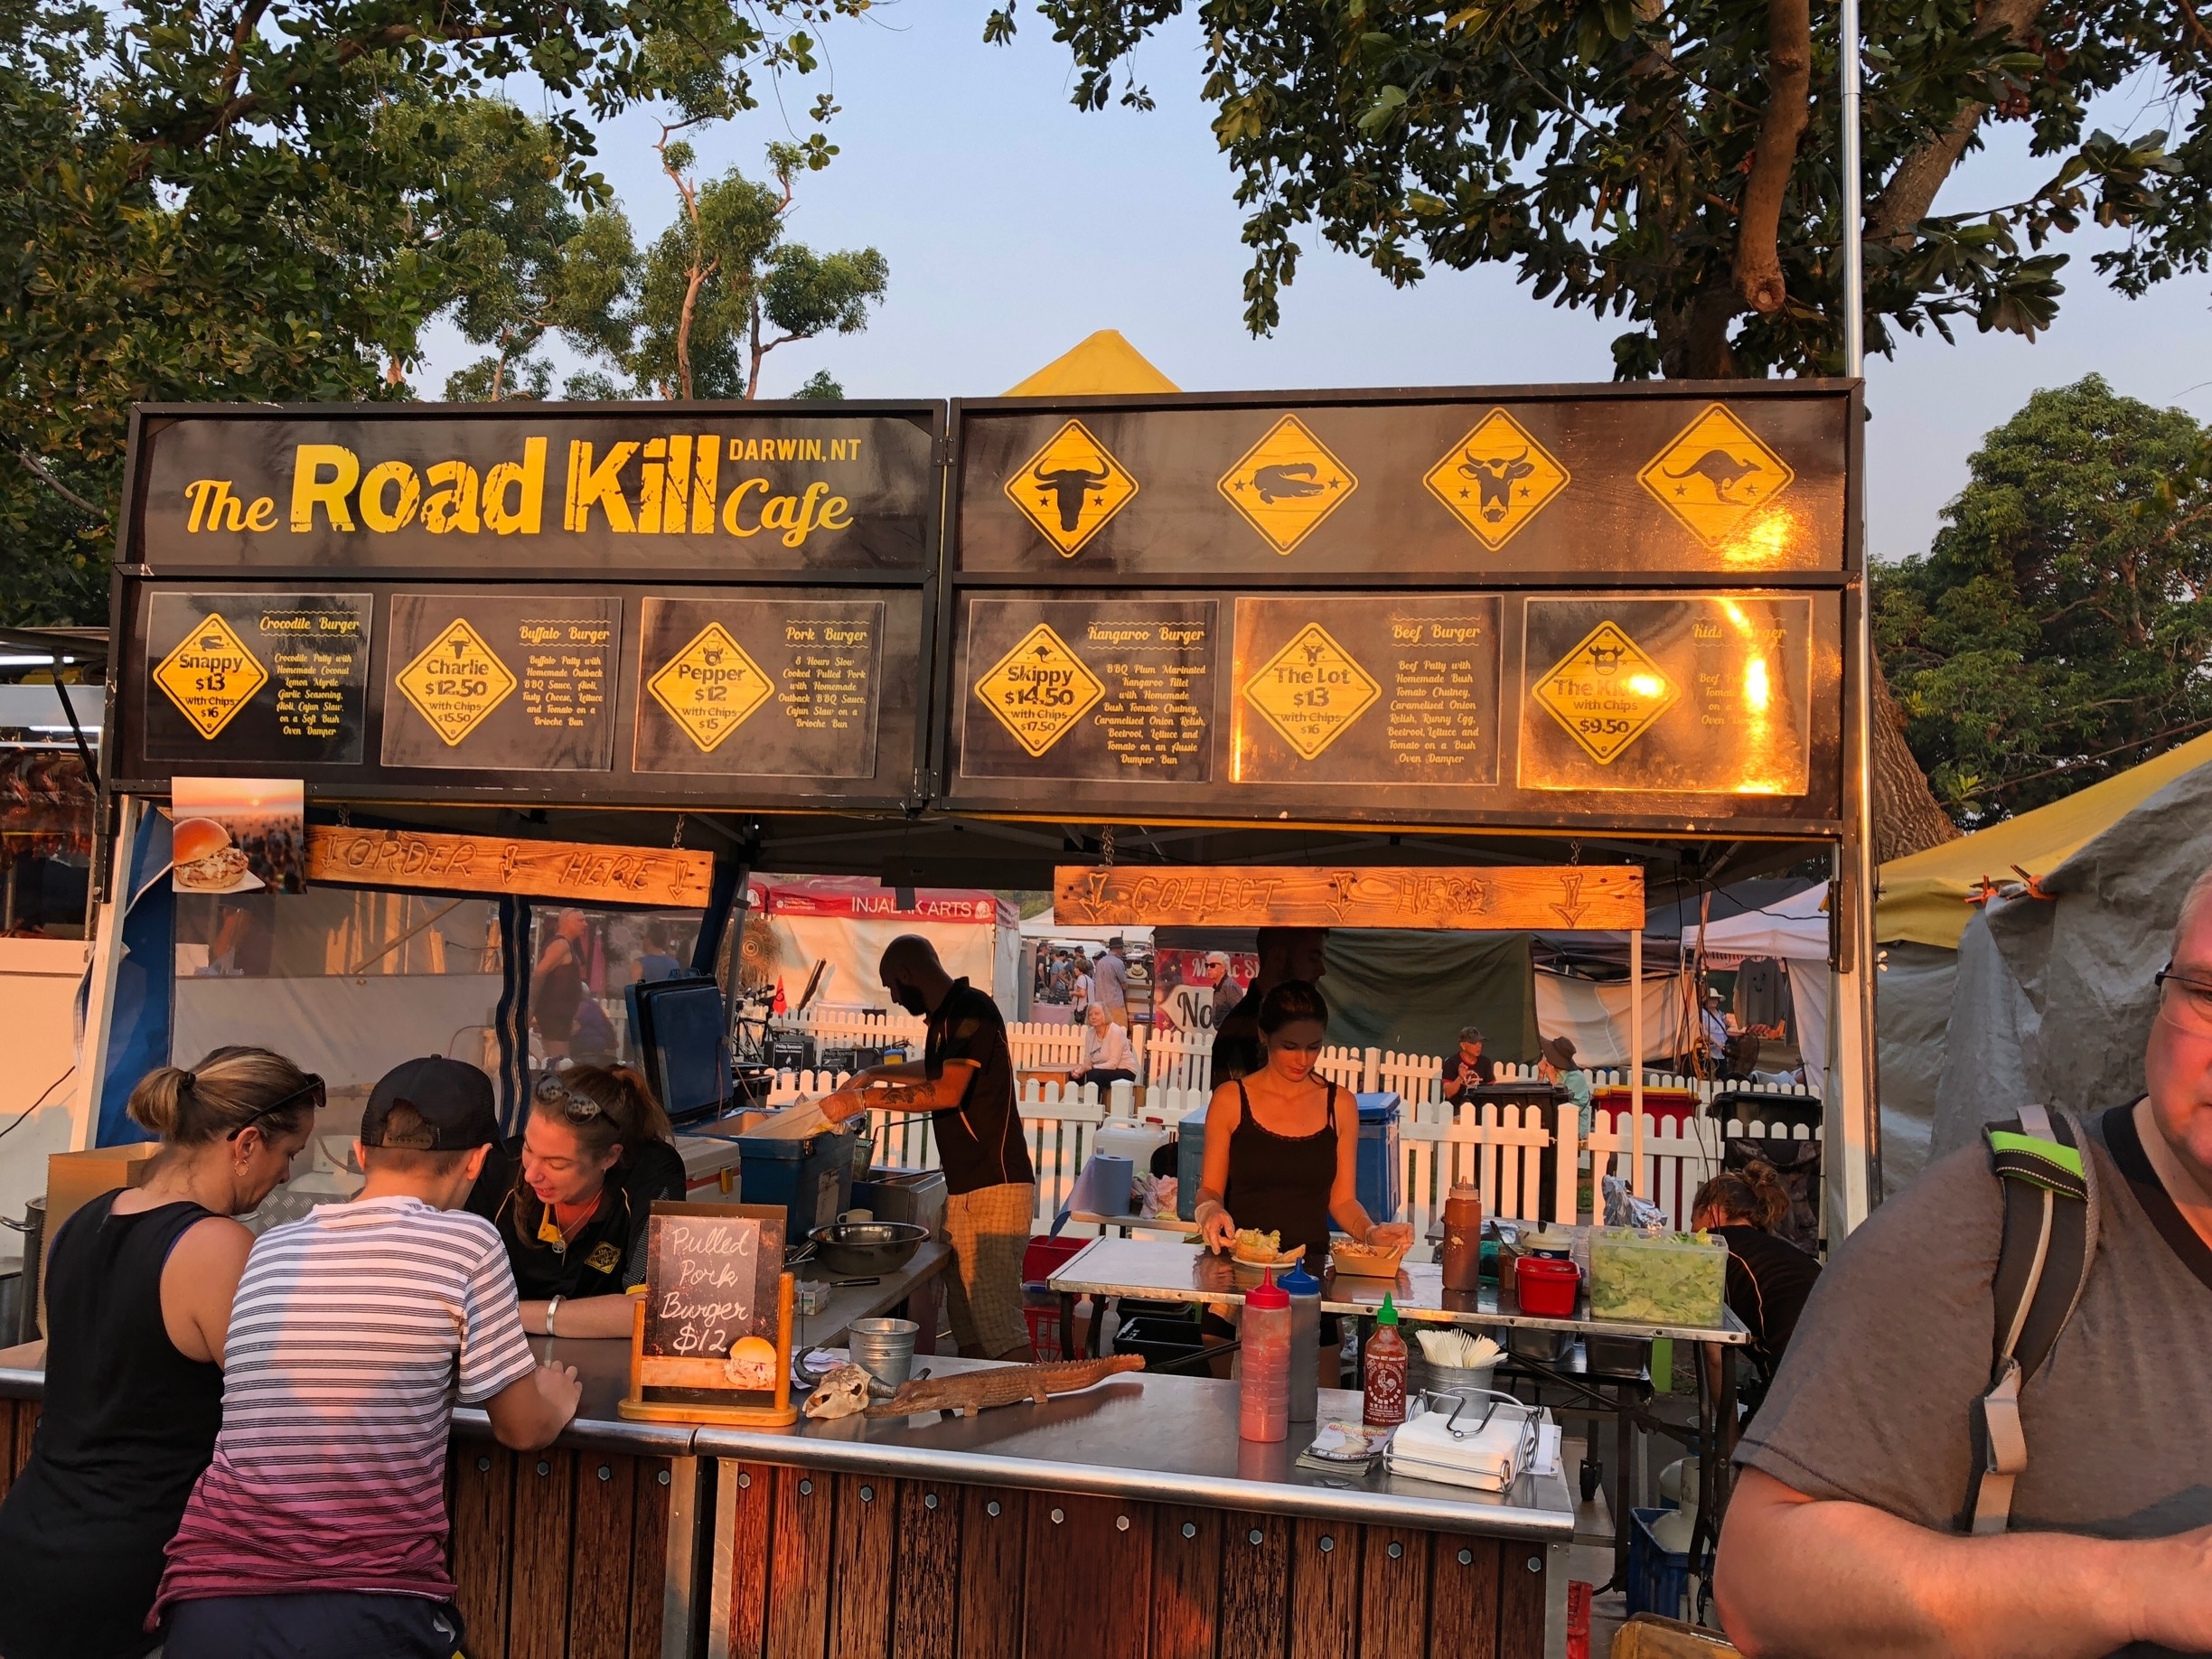 Interesting food stall at the Mindil beach market in Darwin.  I wasn’t game to try anything.